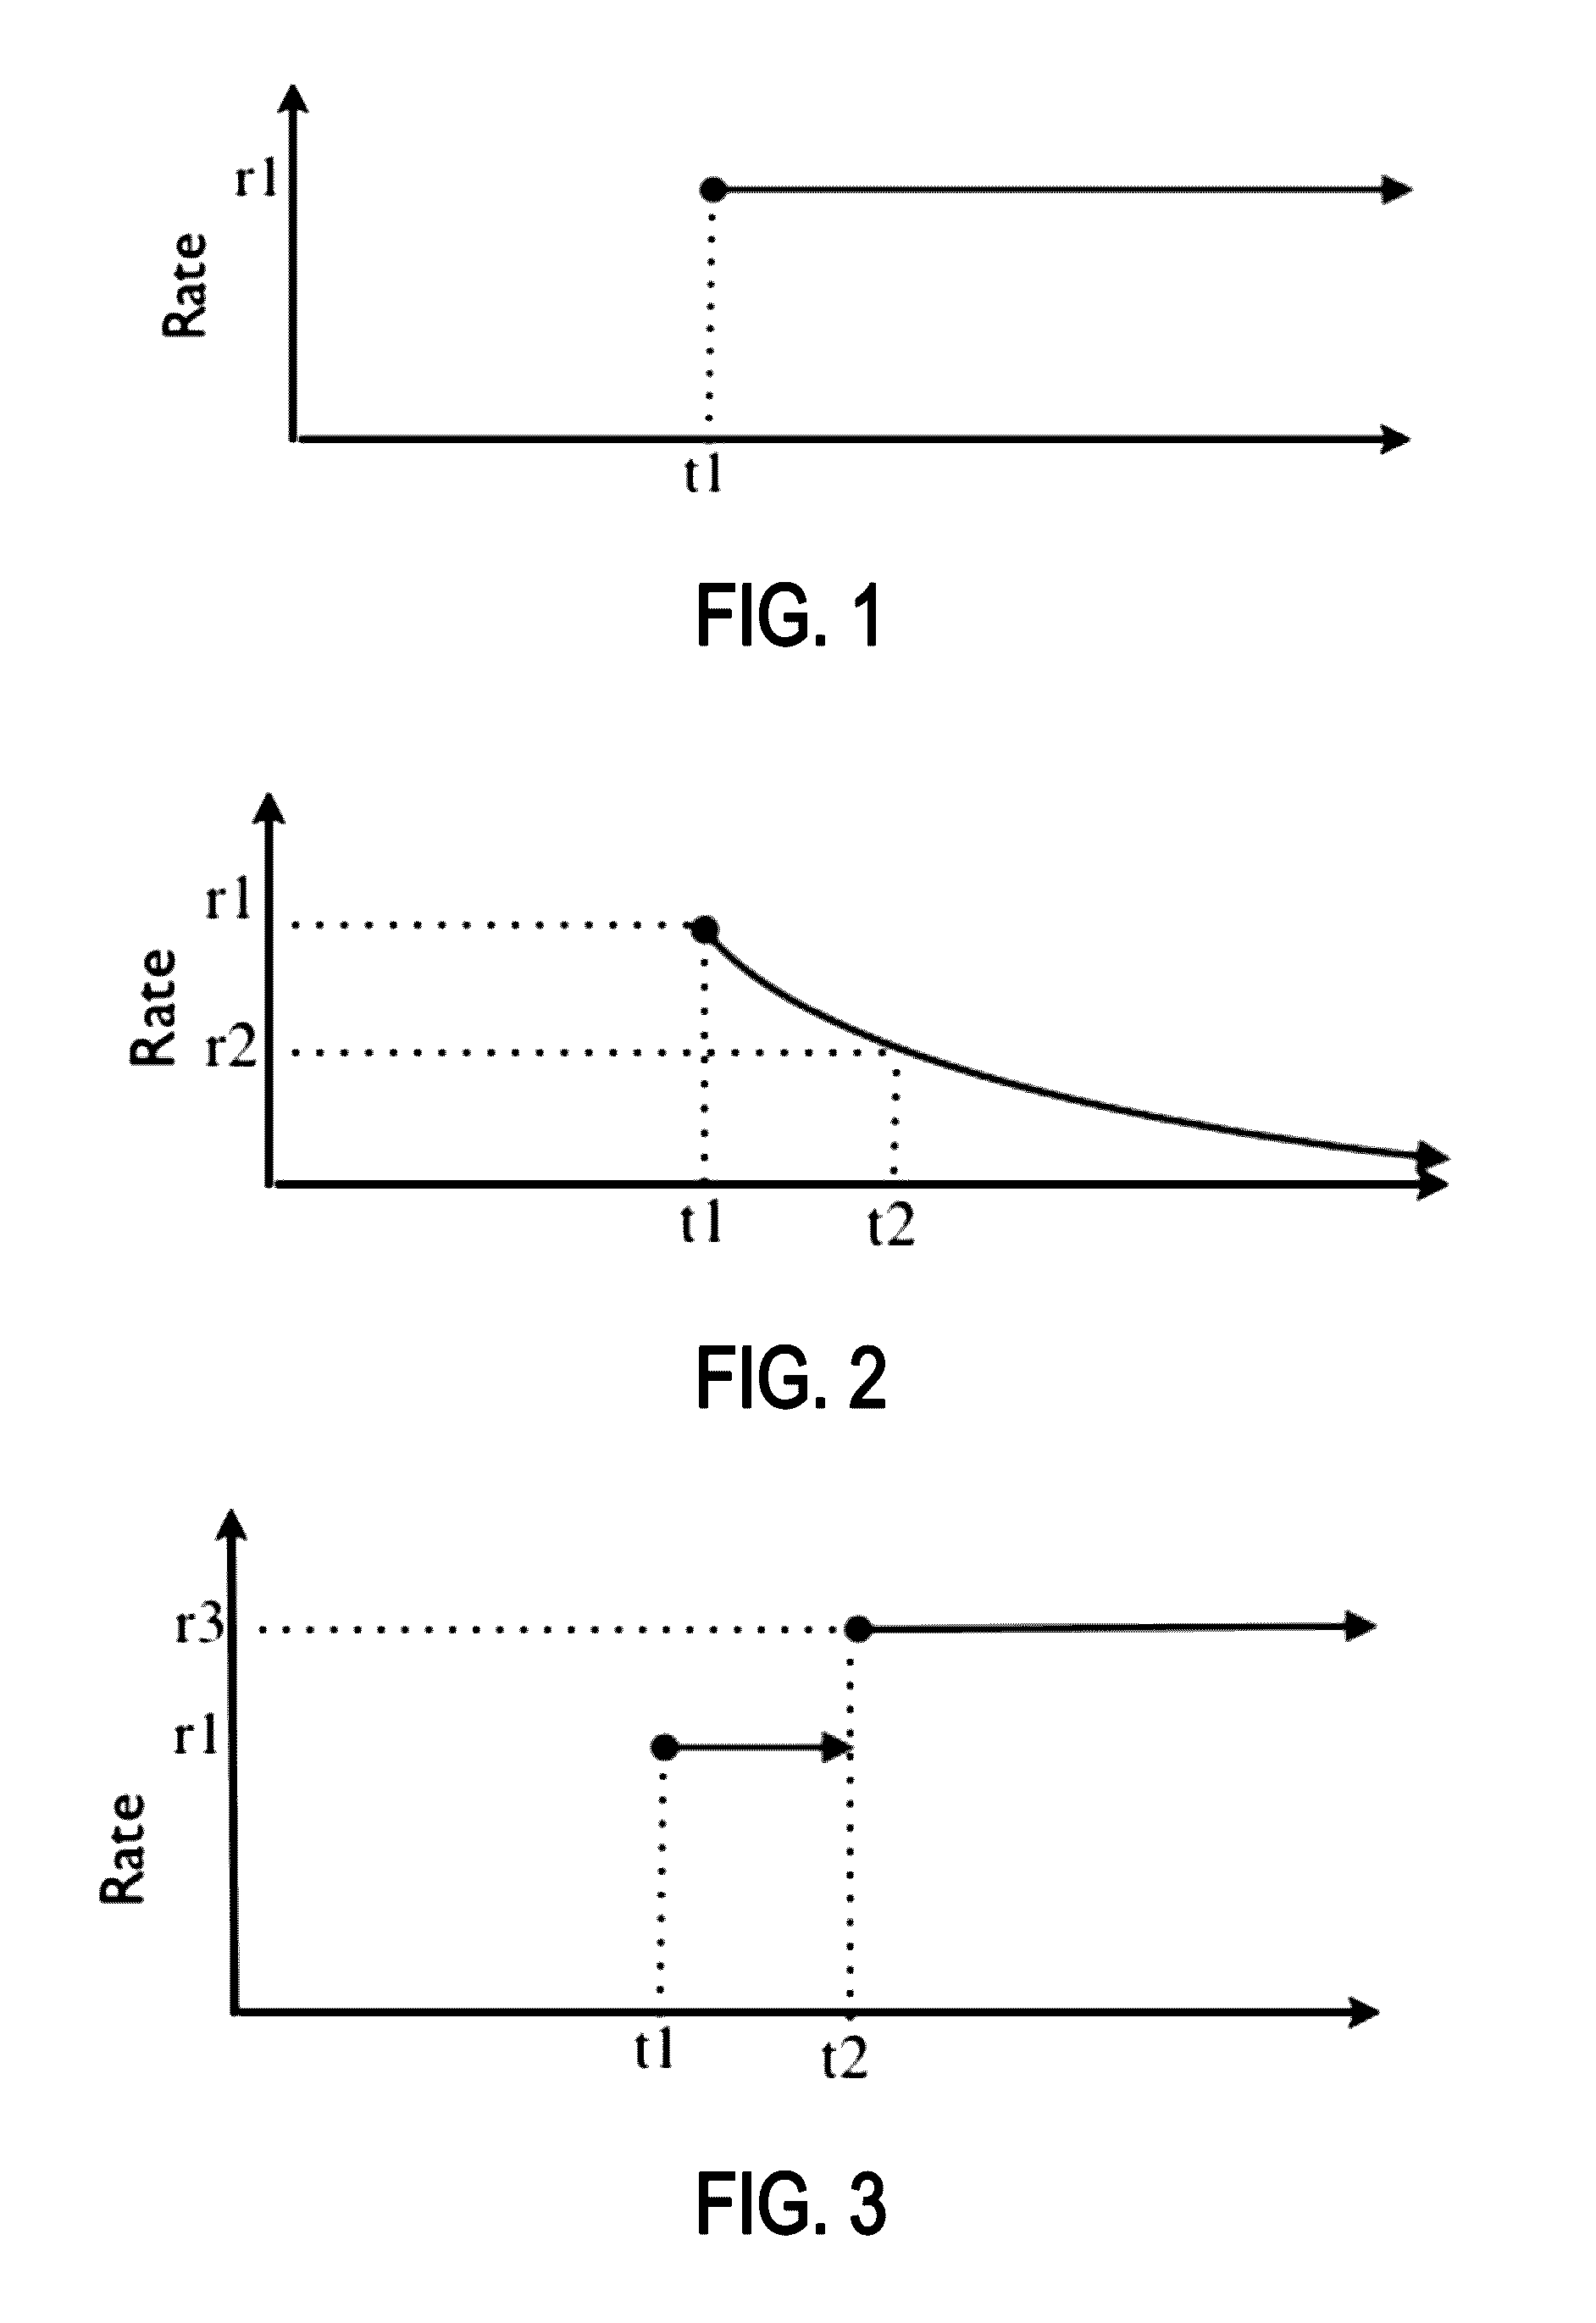 Method for asynchronous calculation of network traffic rates based on randomly sampled packets